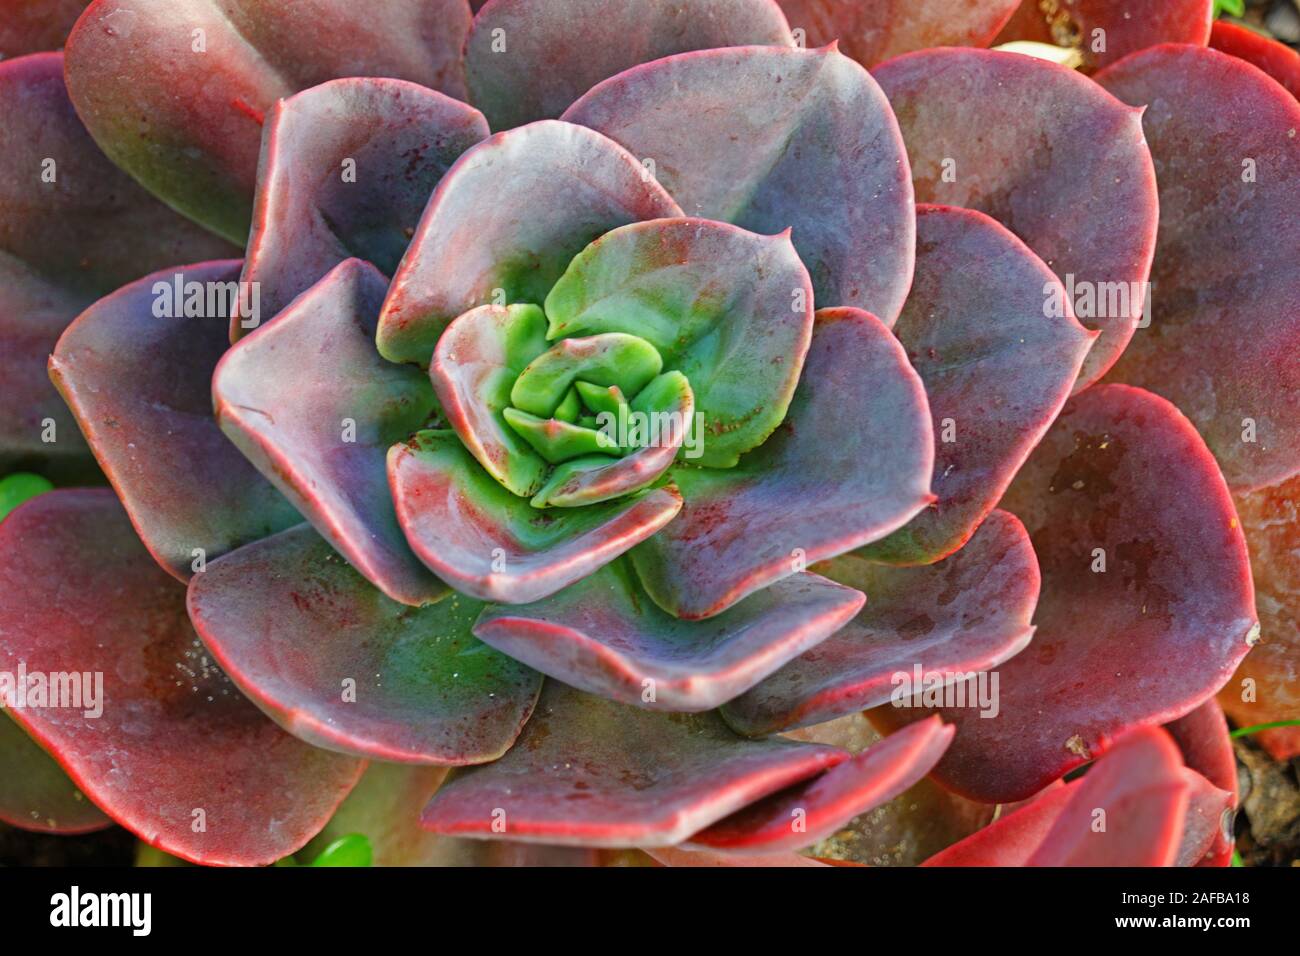 Green And Purple Rosette Of Succulent Plant Stock Photo Alamy